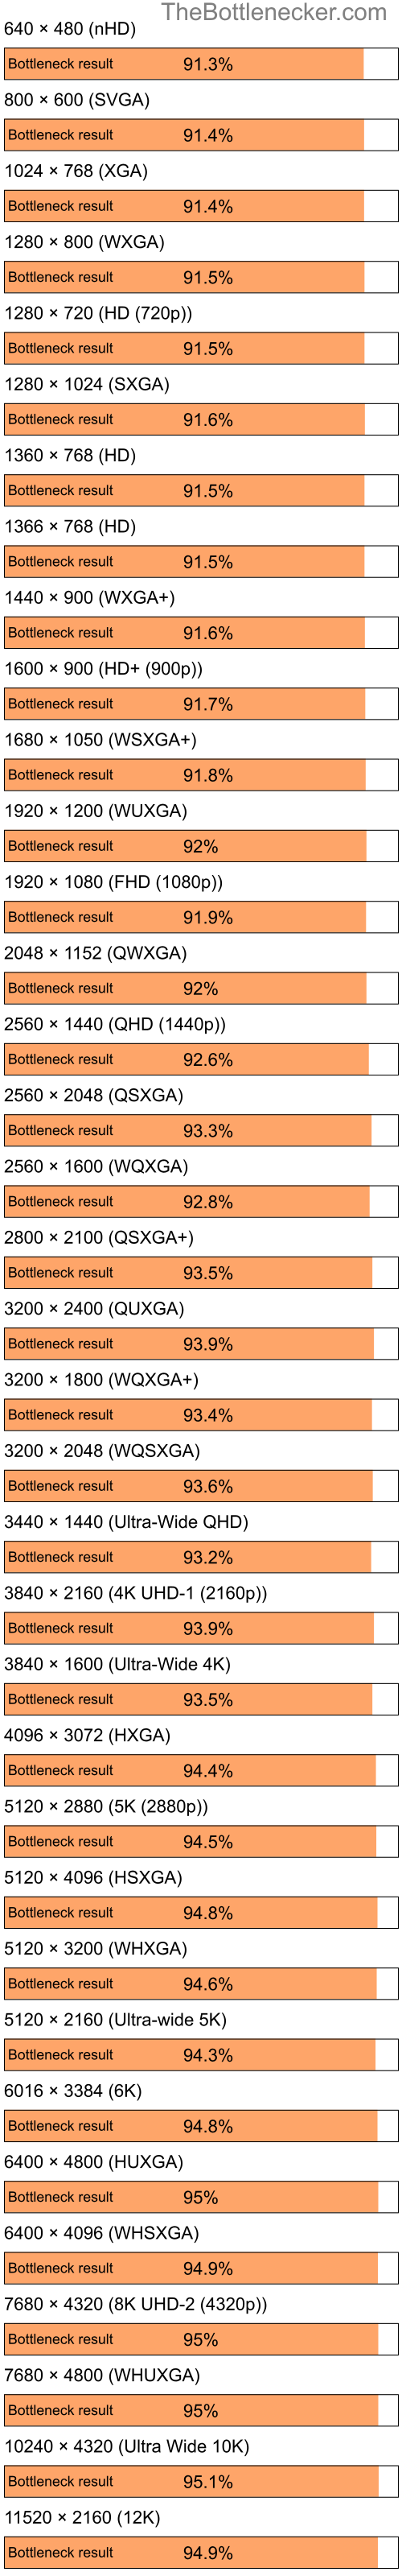 Bottleneck results by resolution for Intel Pentium 4 and NVIDIA GeForce4 MX 420 in Graphic Card Intense Tasks